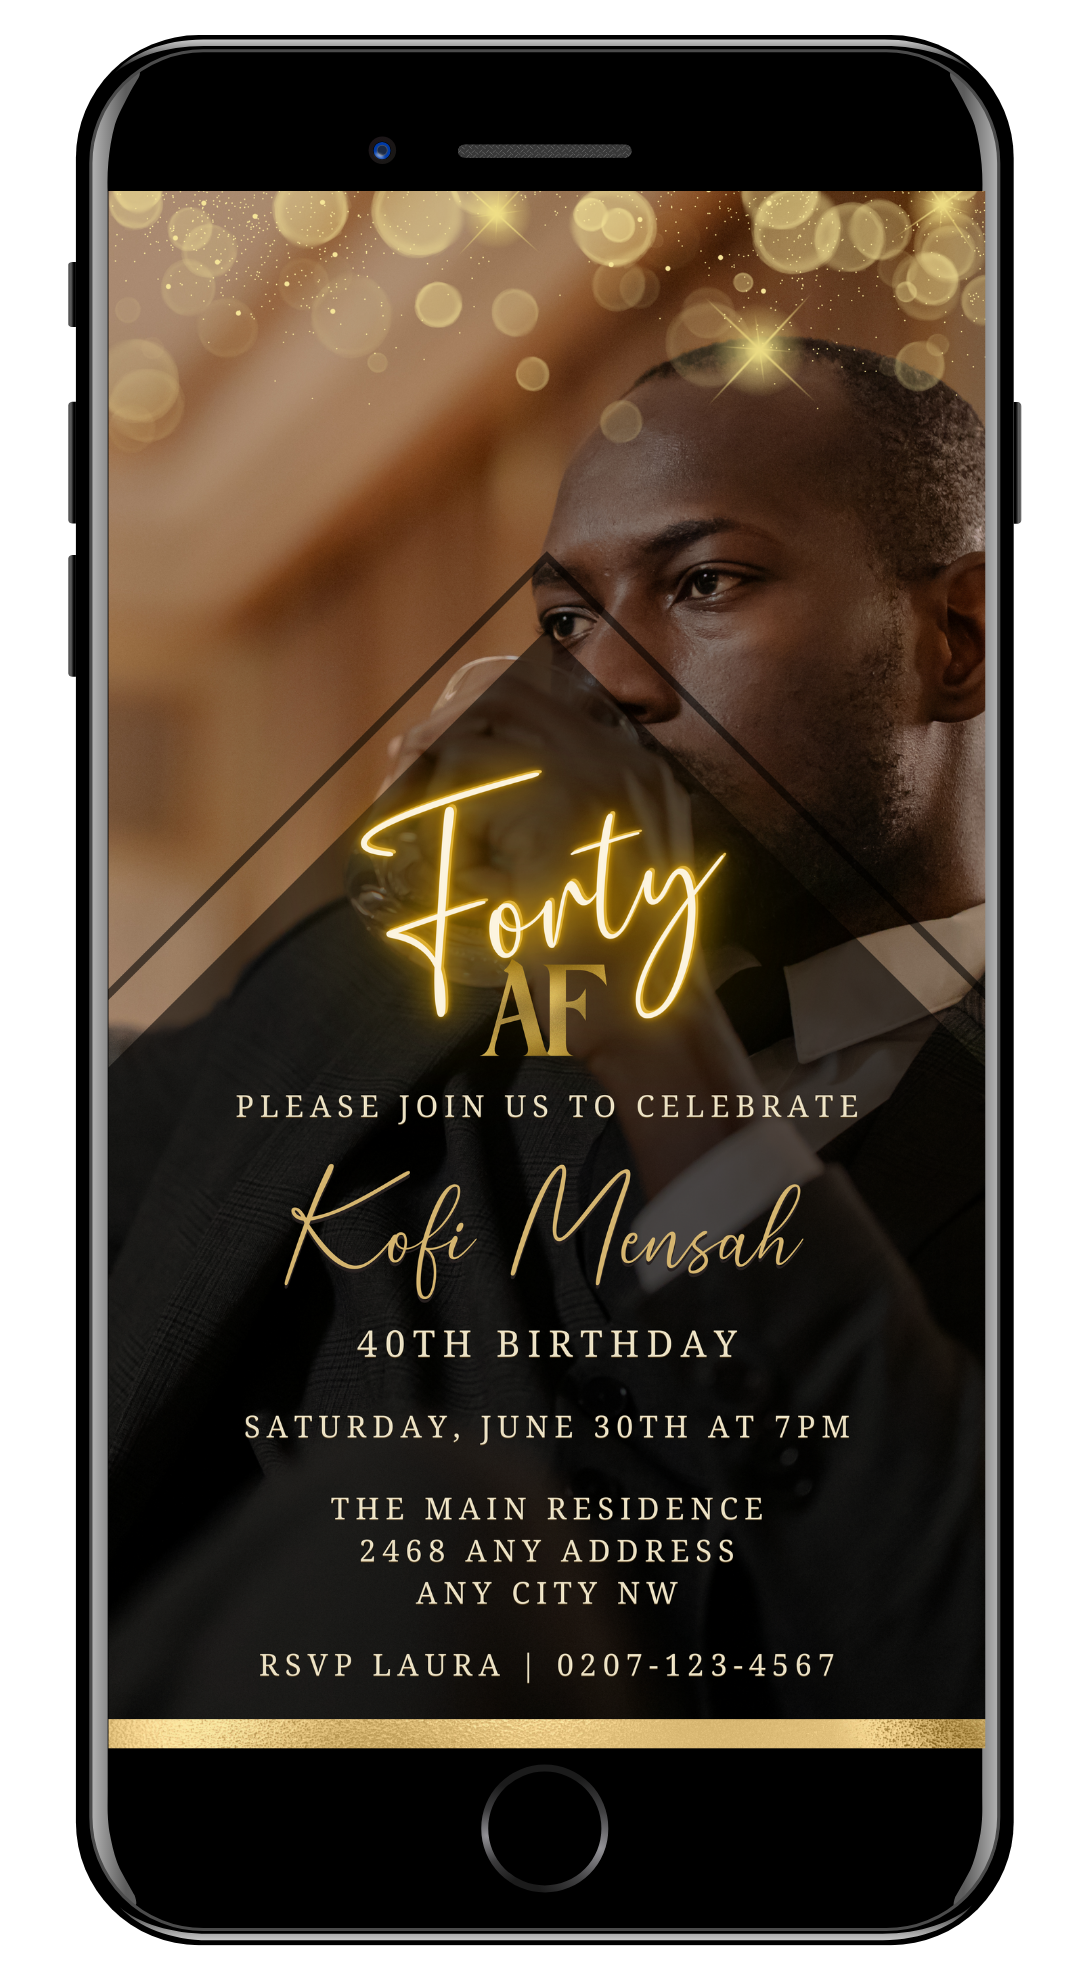 Man in suit and tie with customizable Gold Neon Forty AF Party Evite template for download and personalization using Canva.